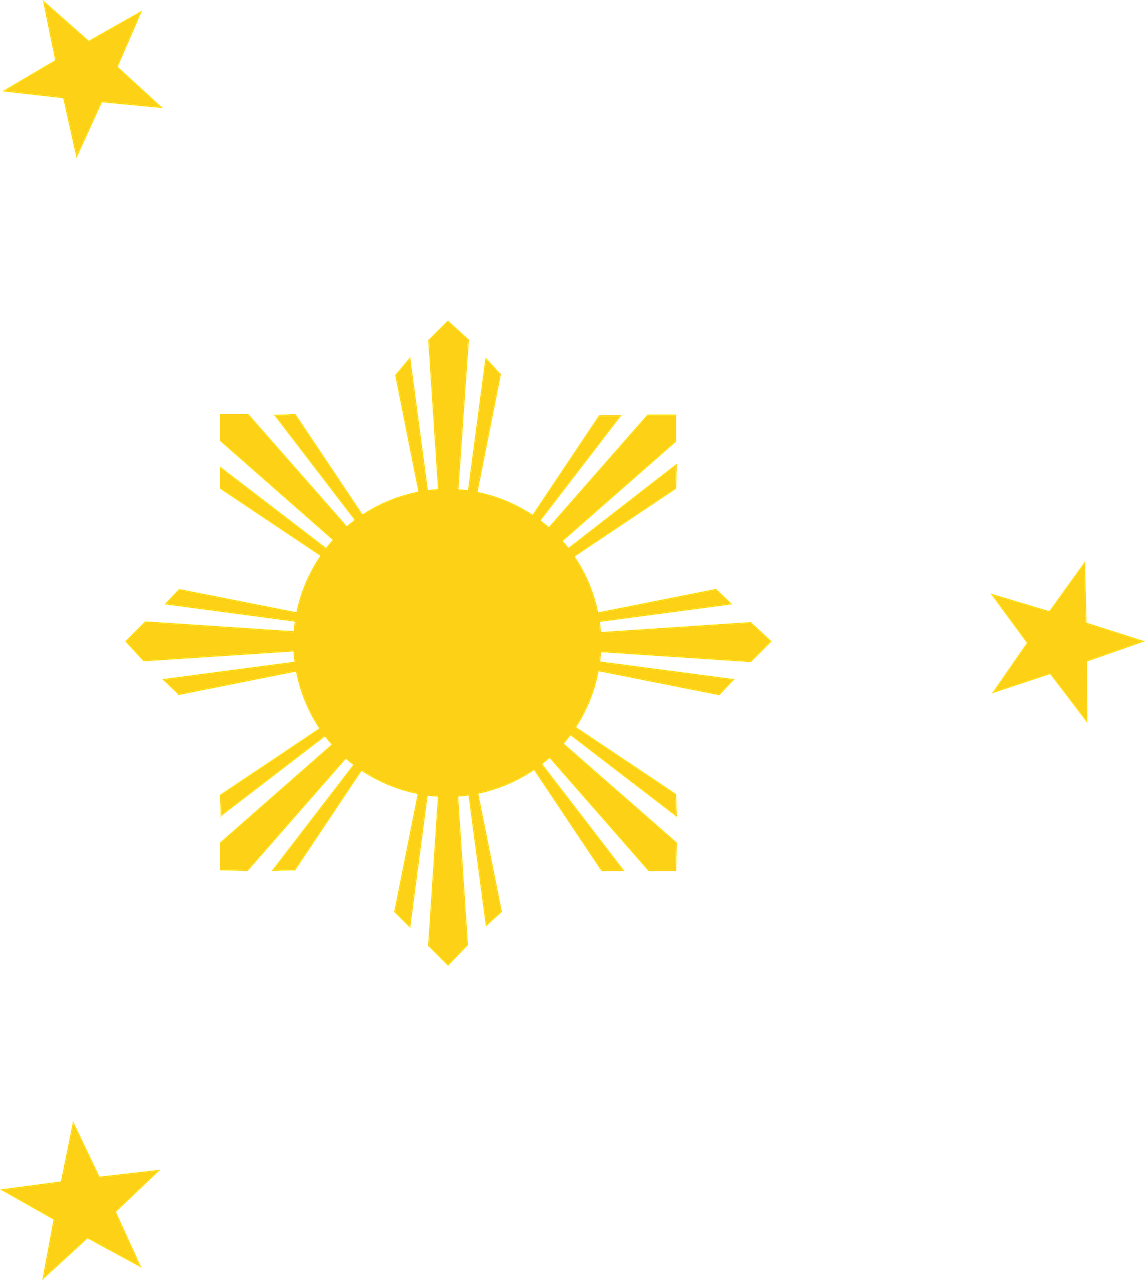 Graphic of yellow sun surrounded by three yellow stars